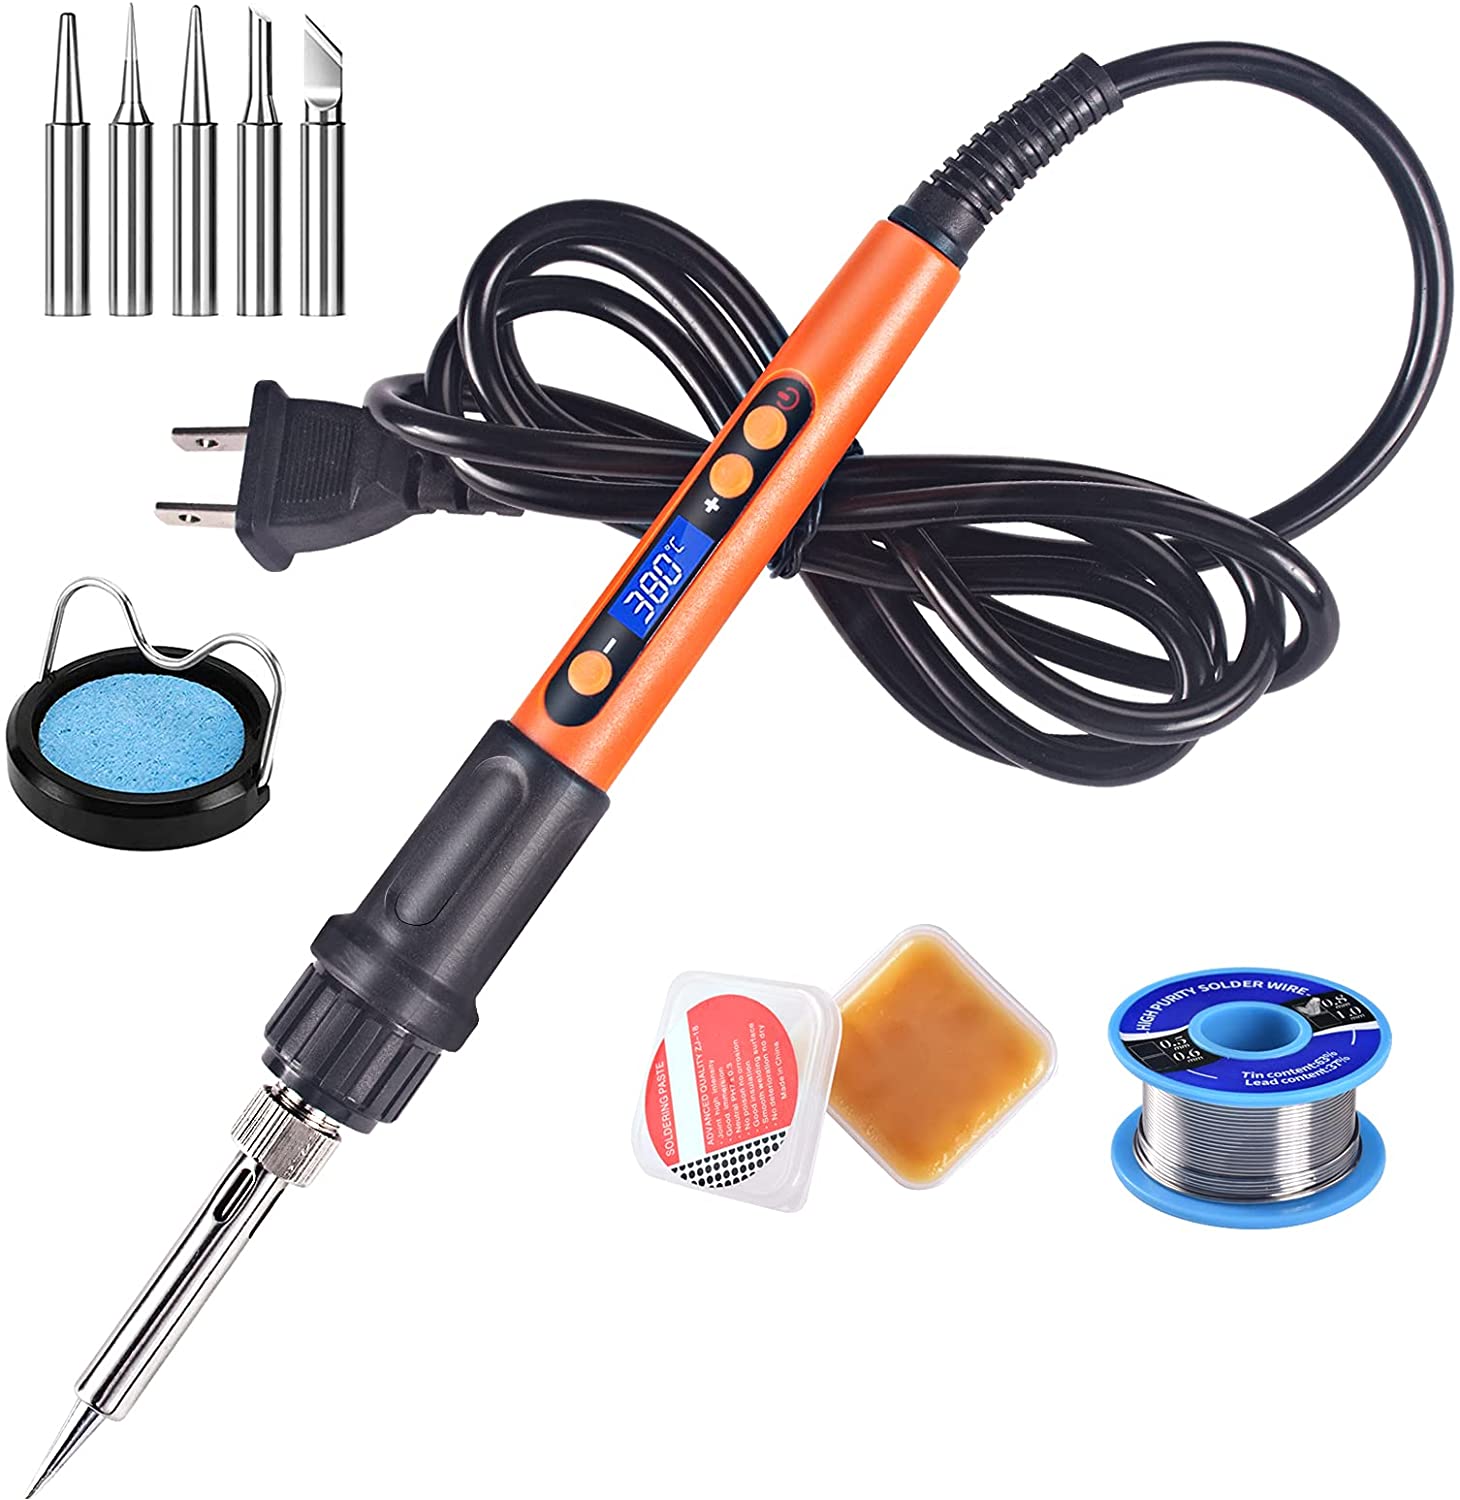 The Professional Best Soldering Irons for Electronics | Electric Shop